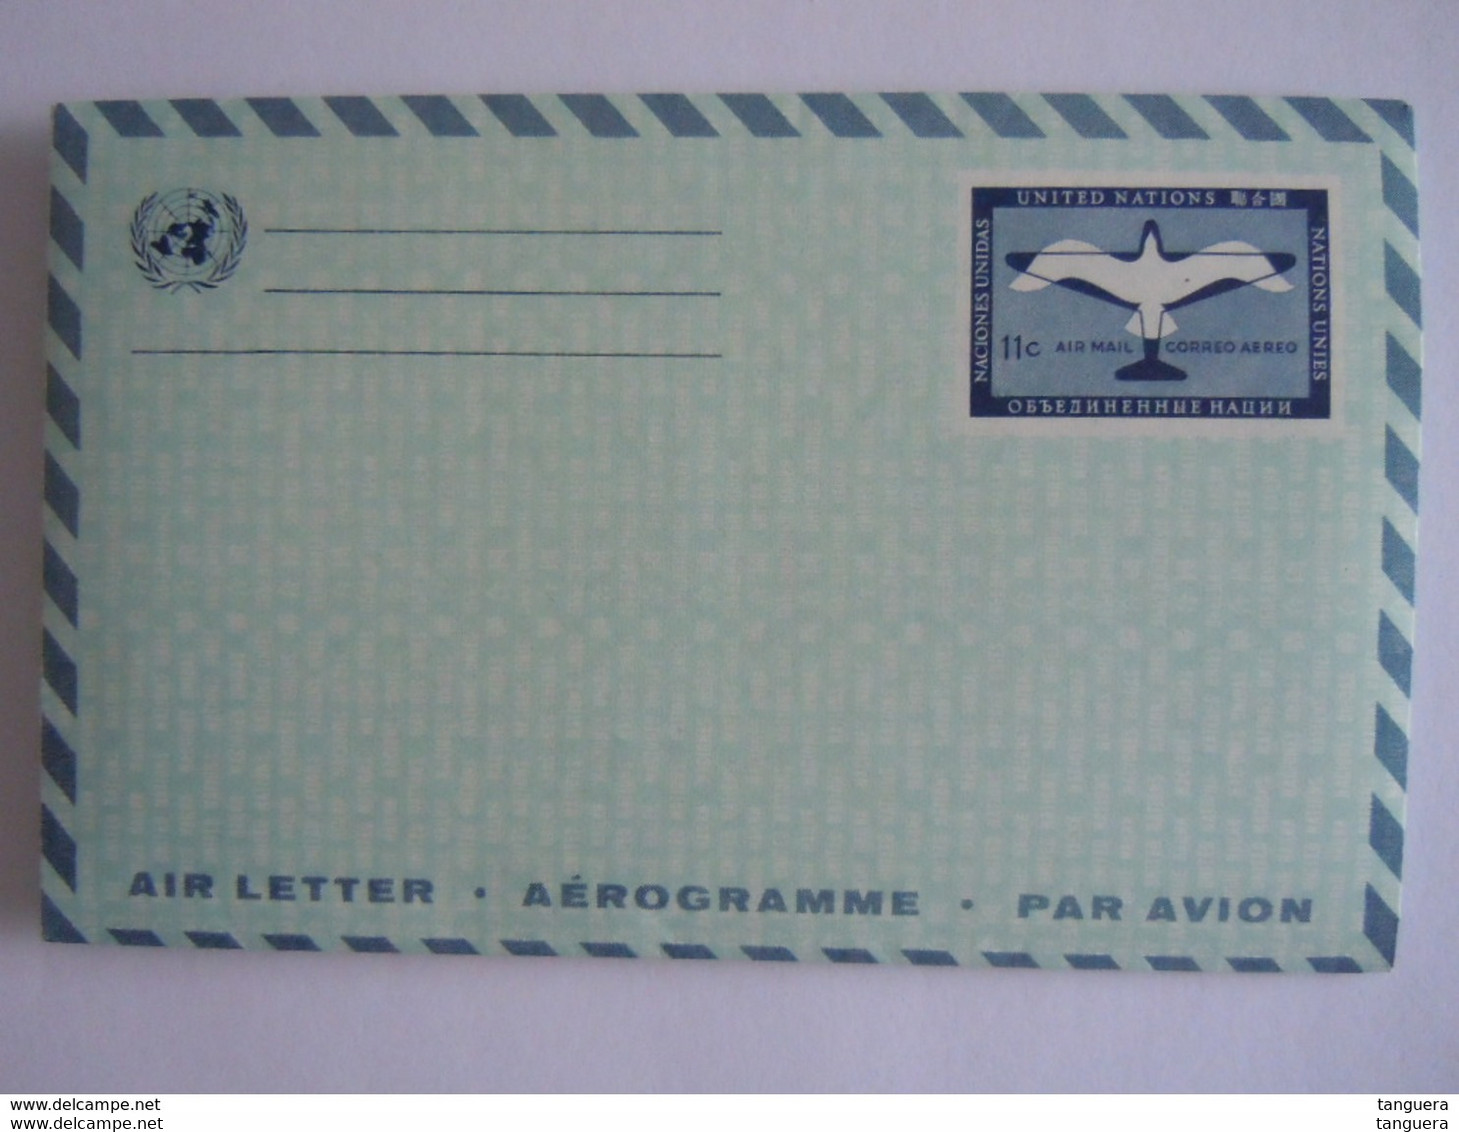 UN UNO United Nations New York Aerogramme Stationery Entier Postal Air Letter 11c Bird Mint - Airmail